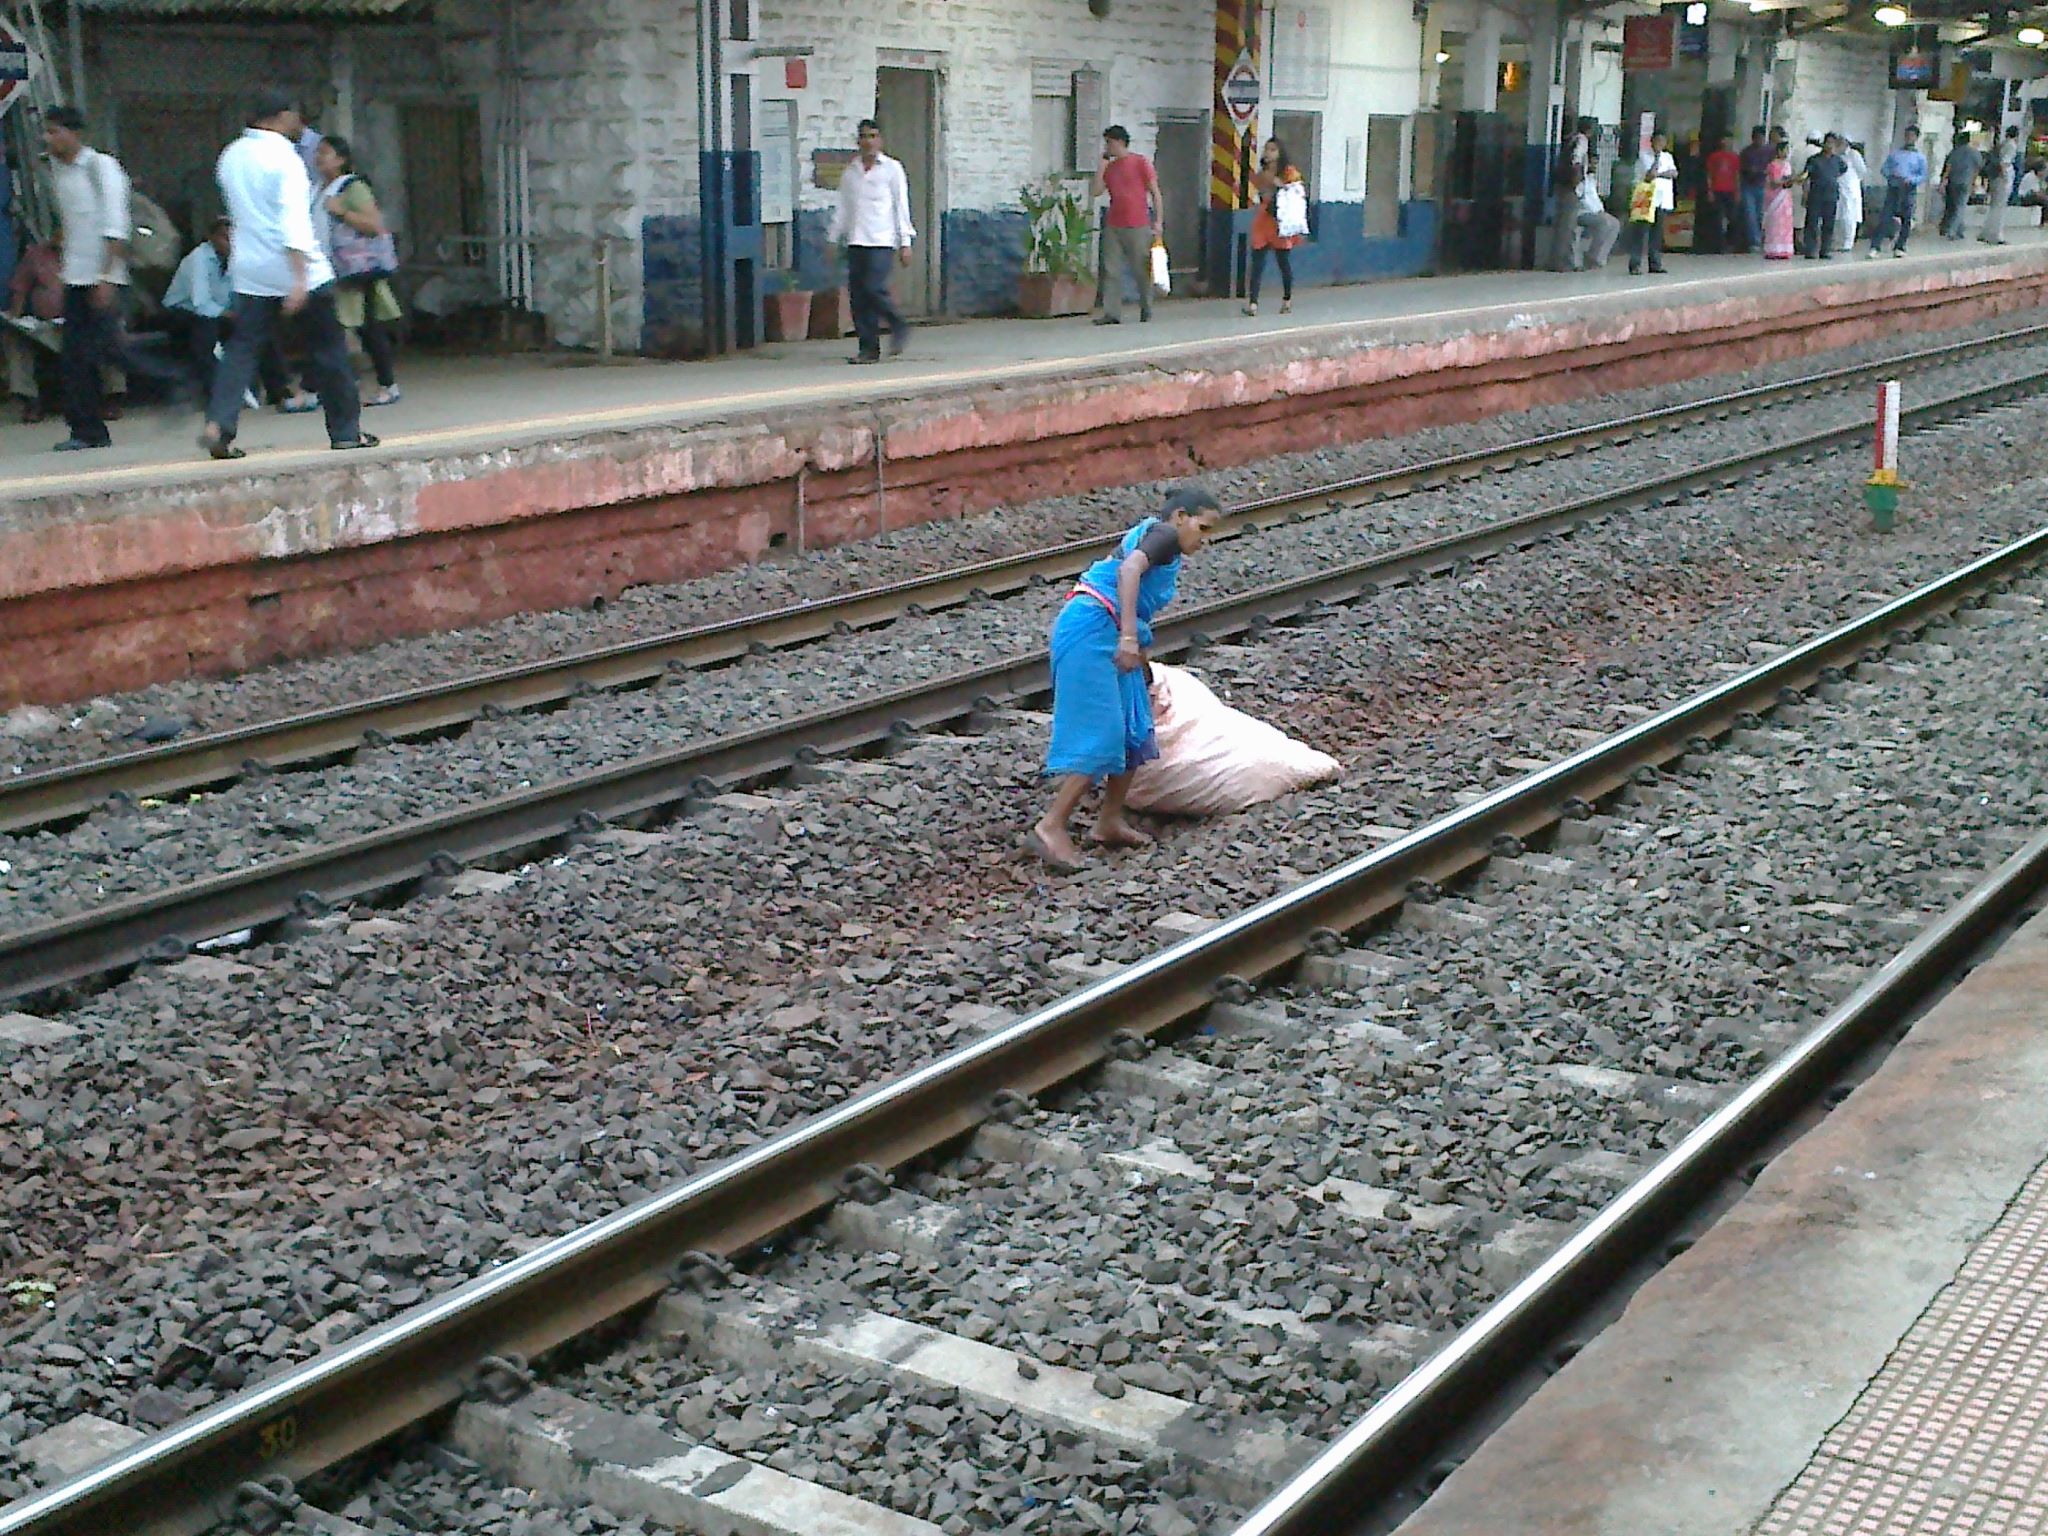 Railway cleaning woman